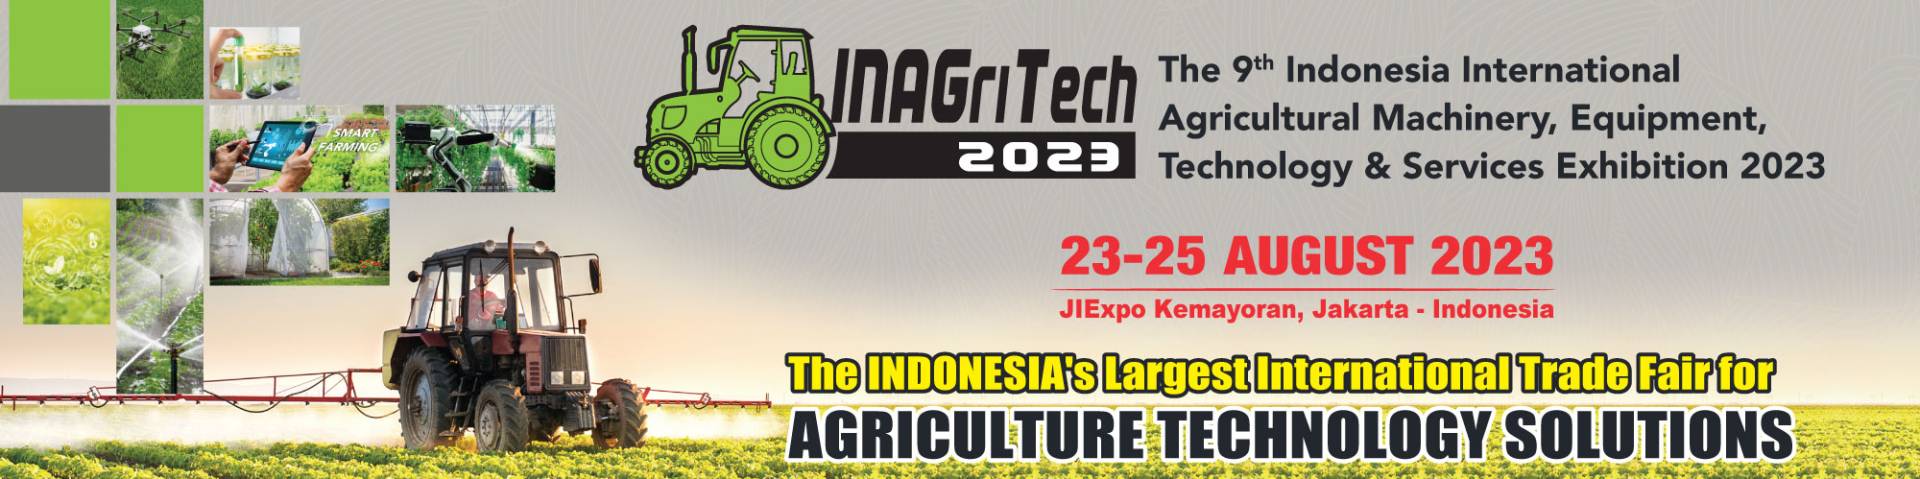 Inagritech Indonesia